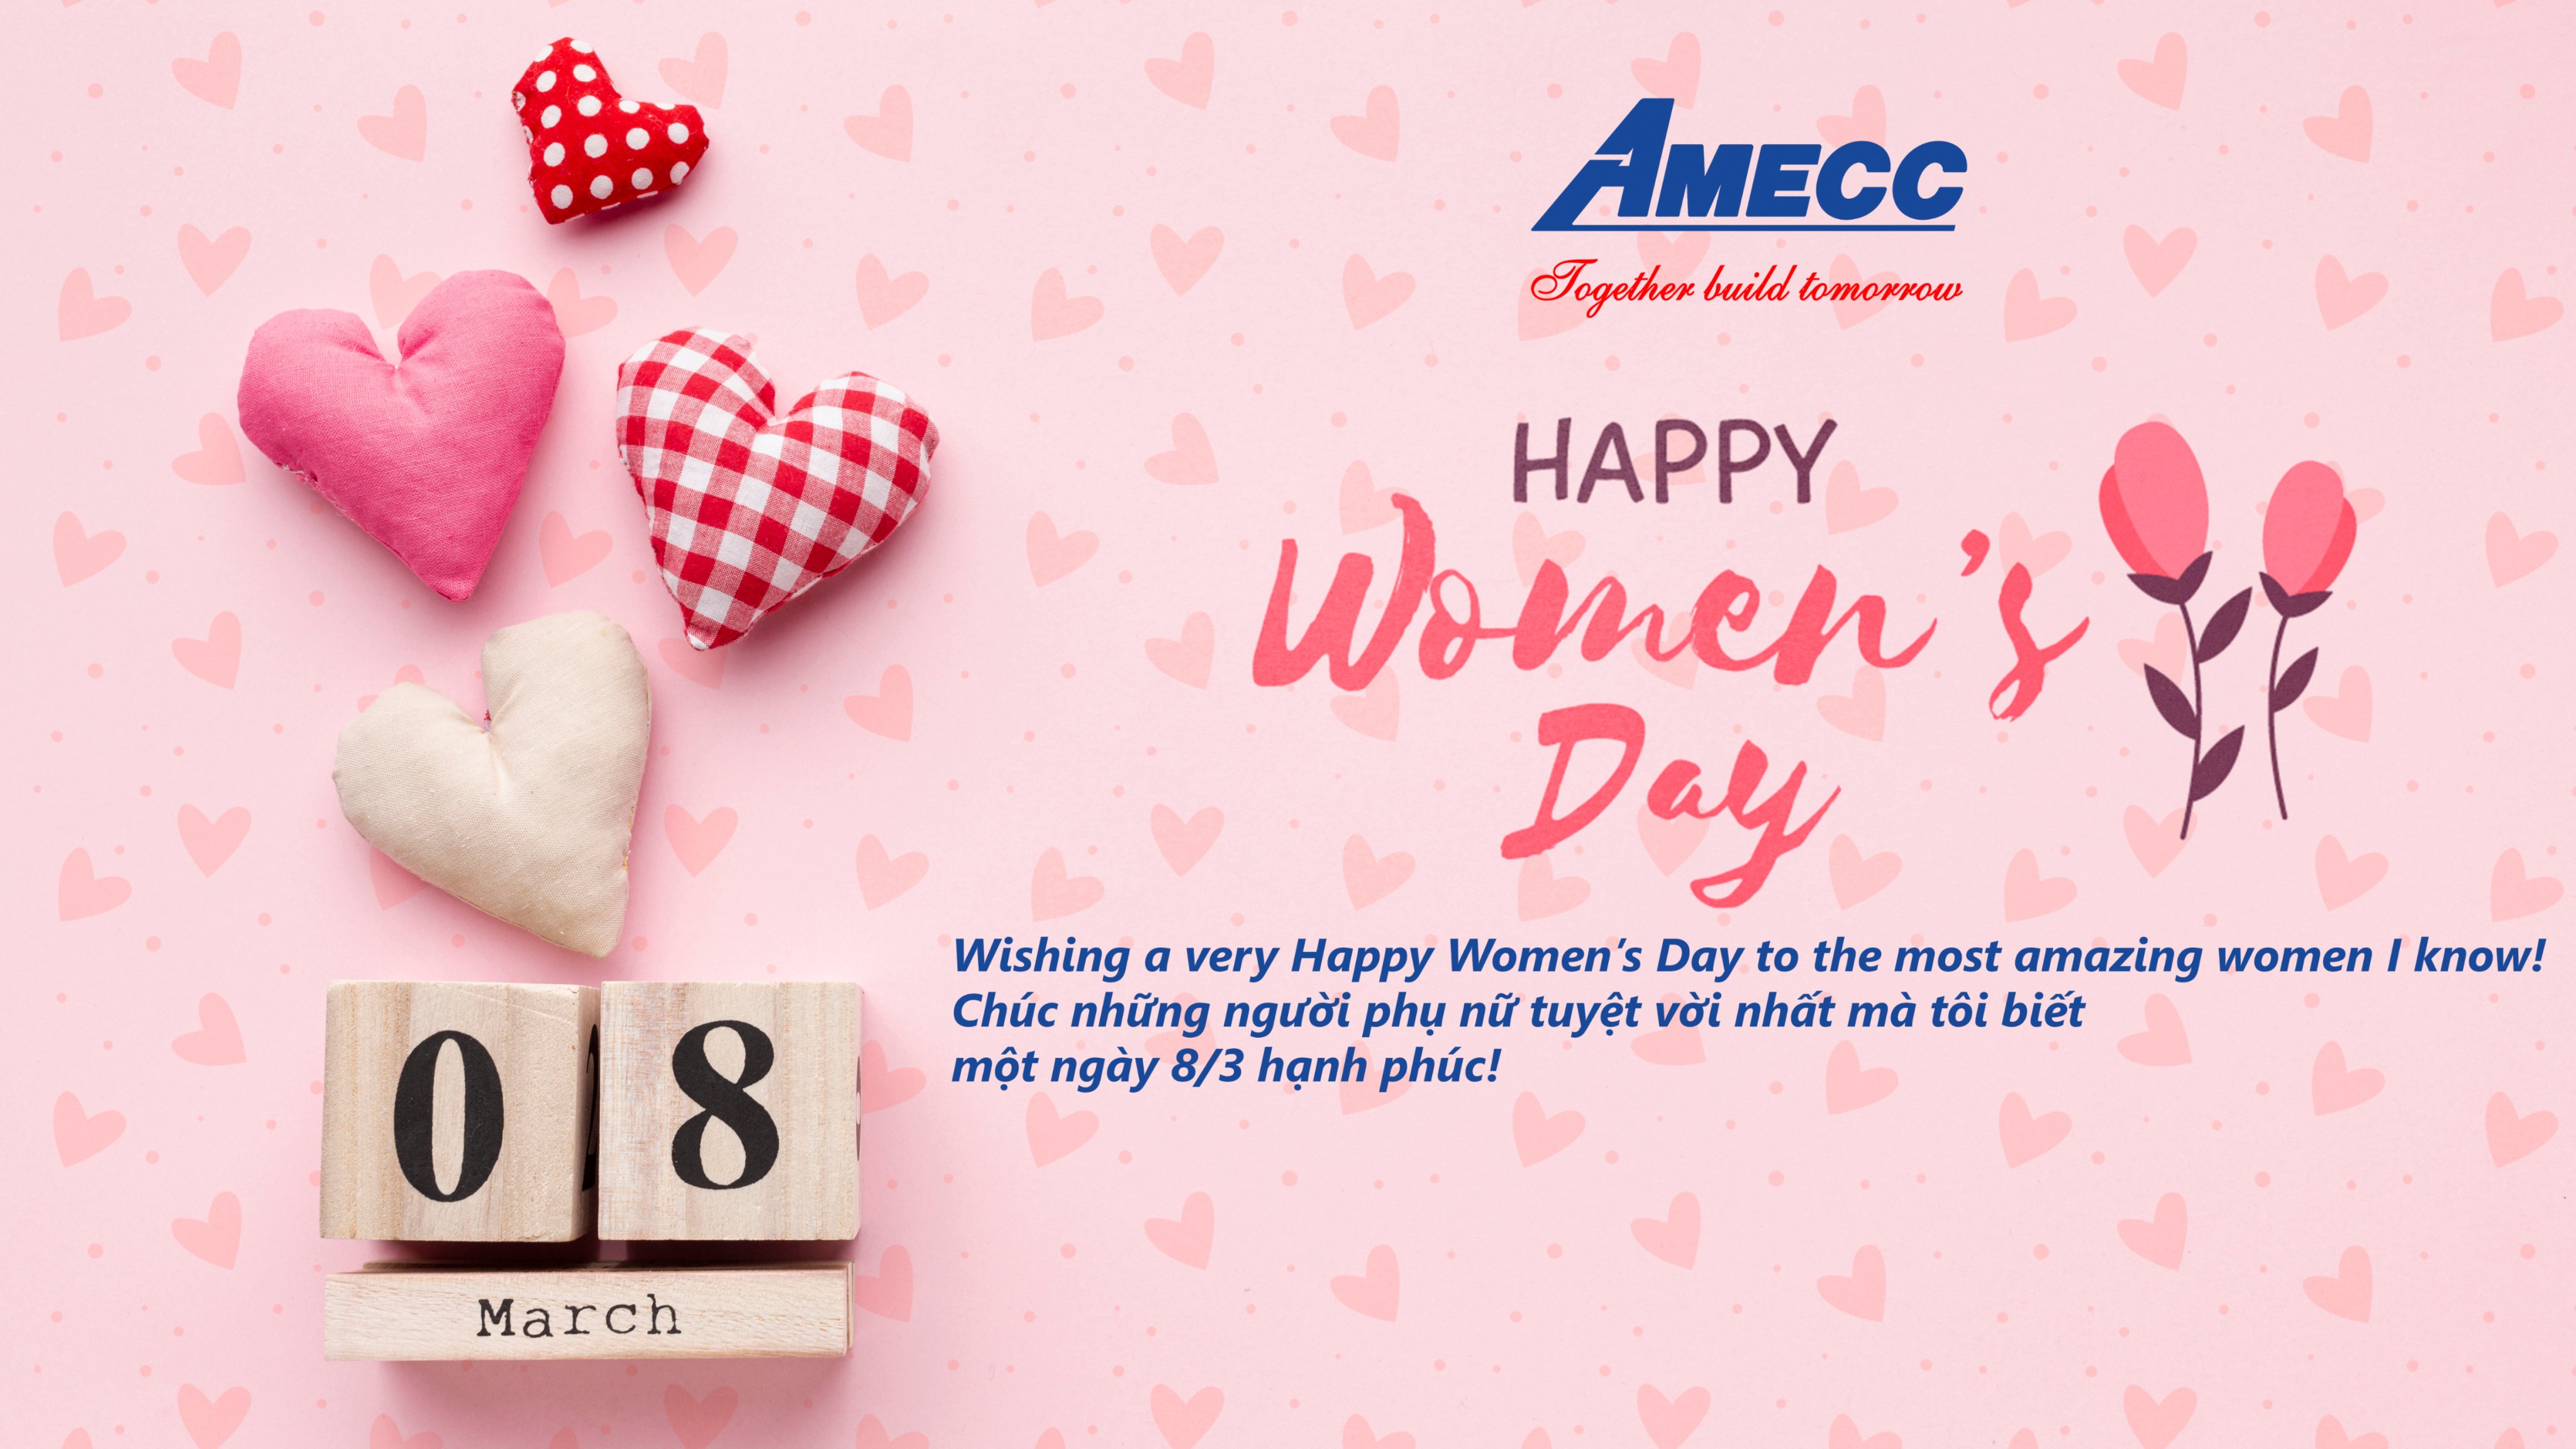 AMECC- CONGRATULATIONS ON THE OCCASION OF INTERNATIONAL WOMEN'S DAY 8/3